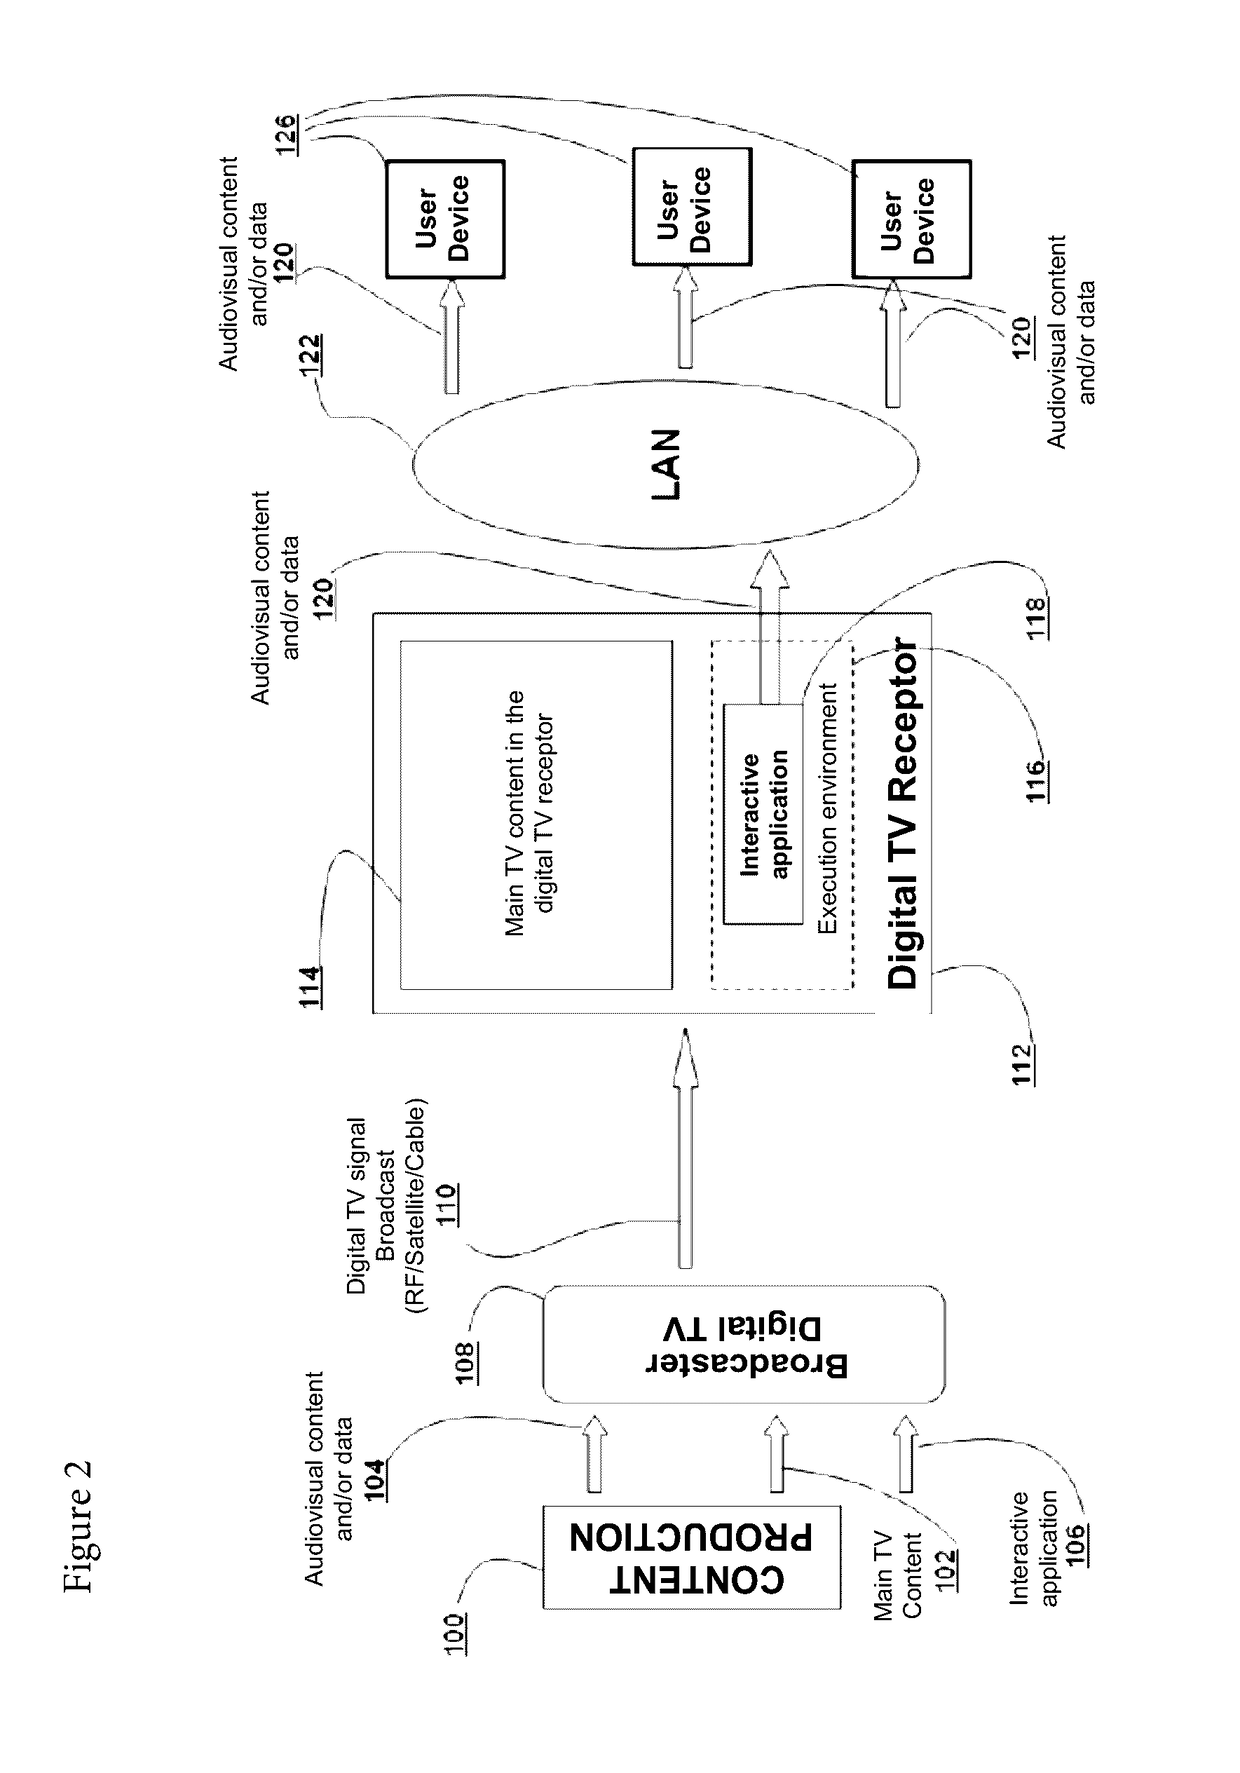 Method for encapsulating audiovisual content streams in mpeg2 private sections, device for encapsulating audiovisual content in mpeg2 private sections to be multiplexed in a mpeg2 transport stream; interactive application for digital tv; user device; method for transmission of audiovisual content and/or data and communication protocol for data networks